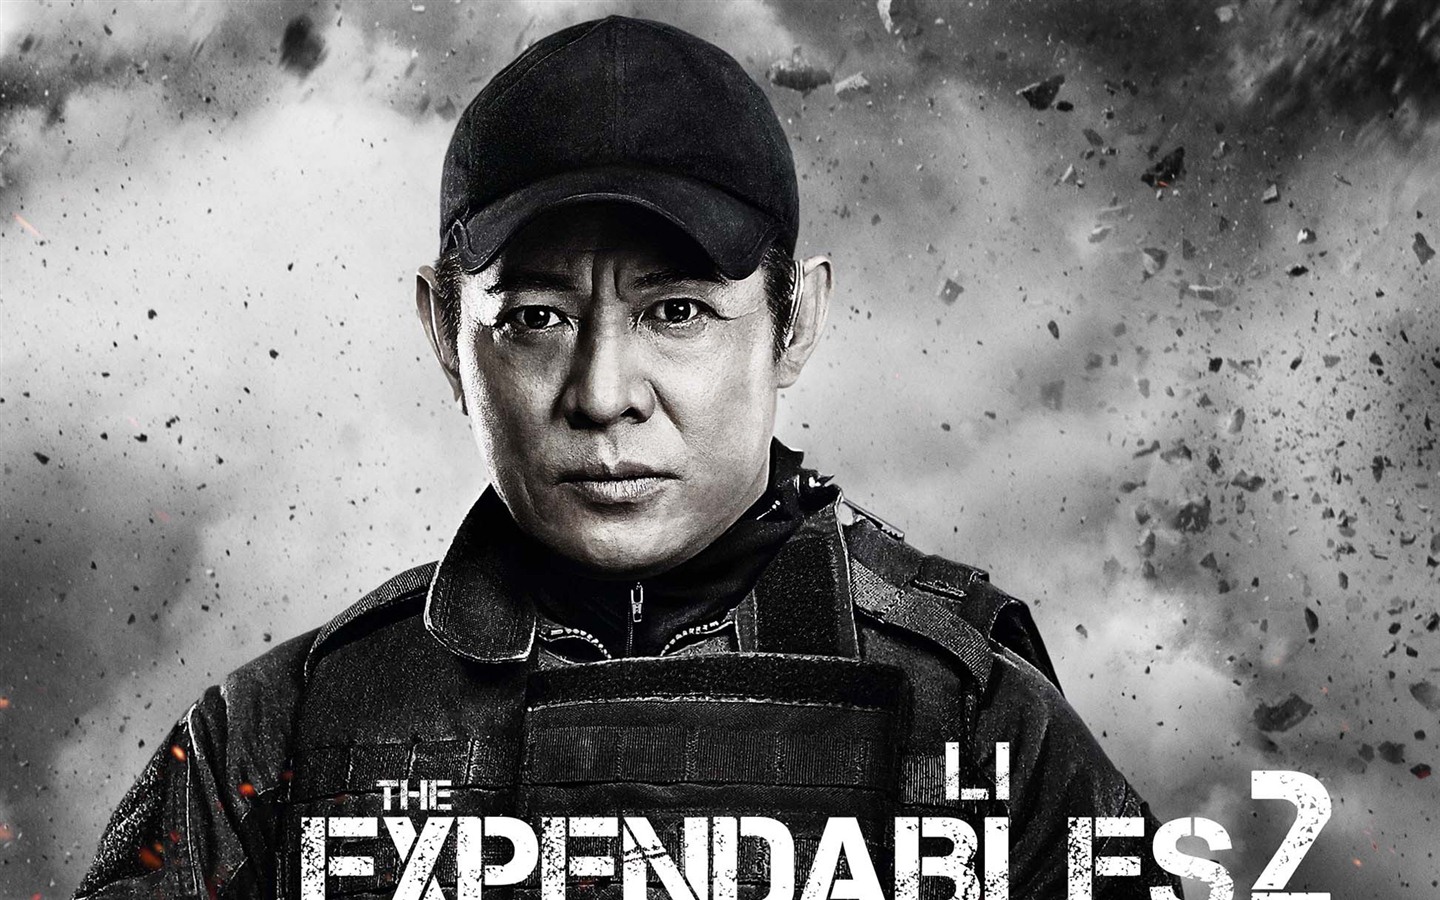 2012 Expendables2 HDの壁紙 #16 - 1440x900